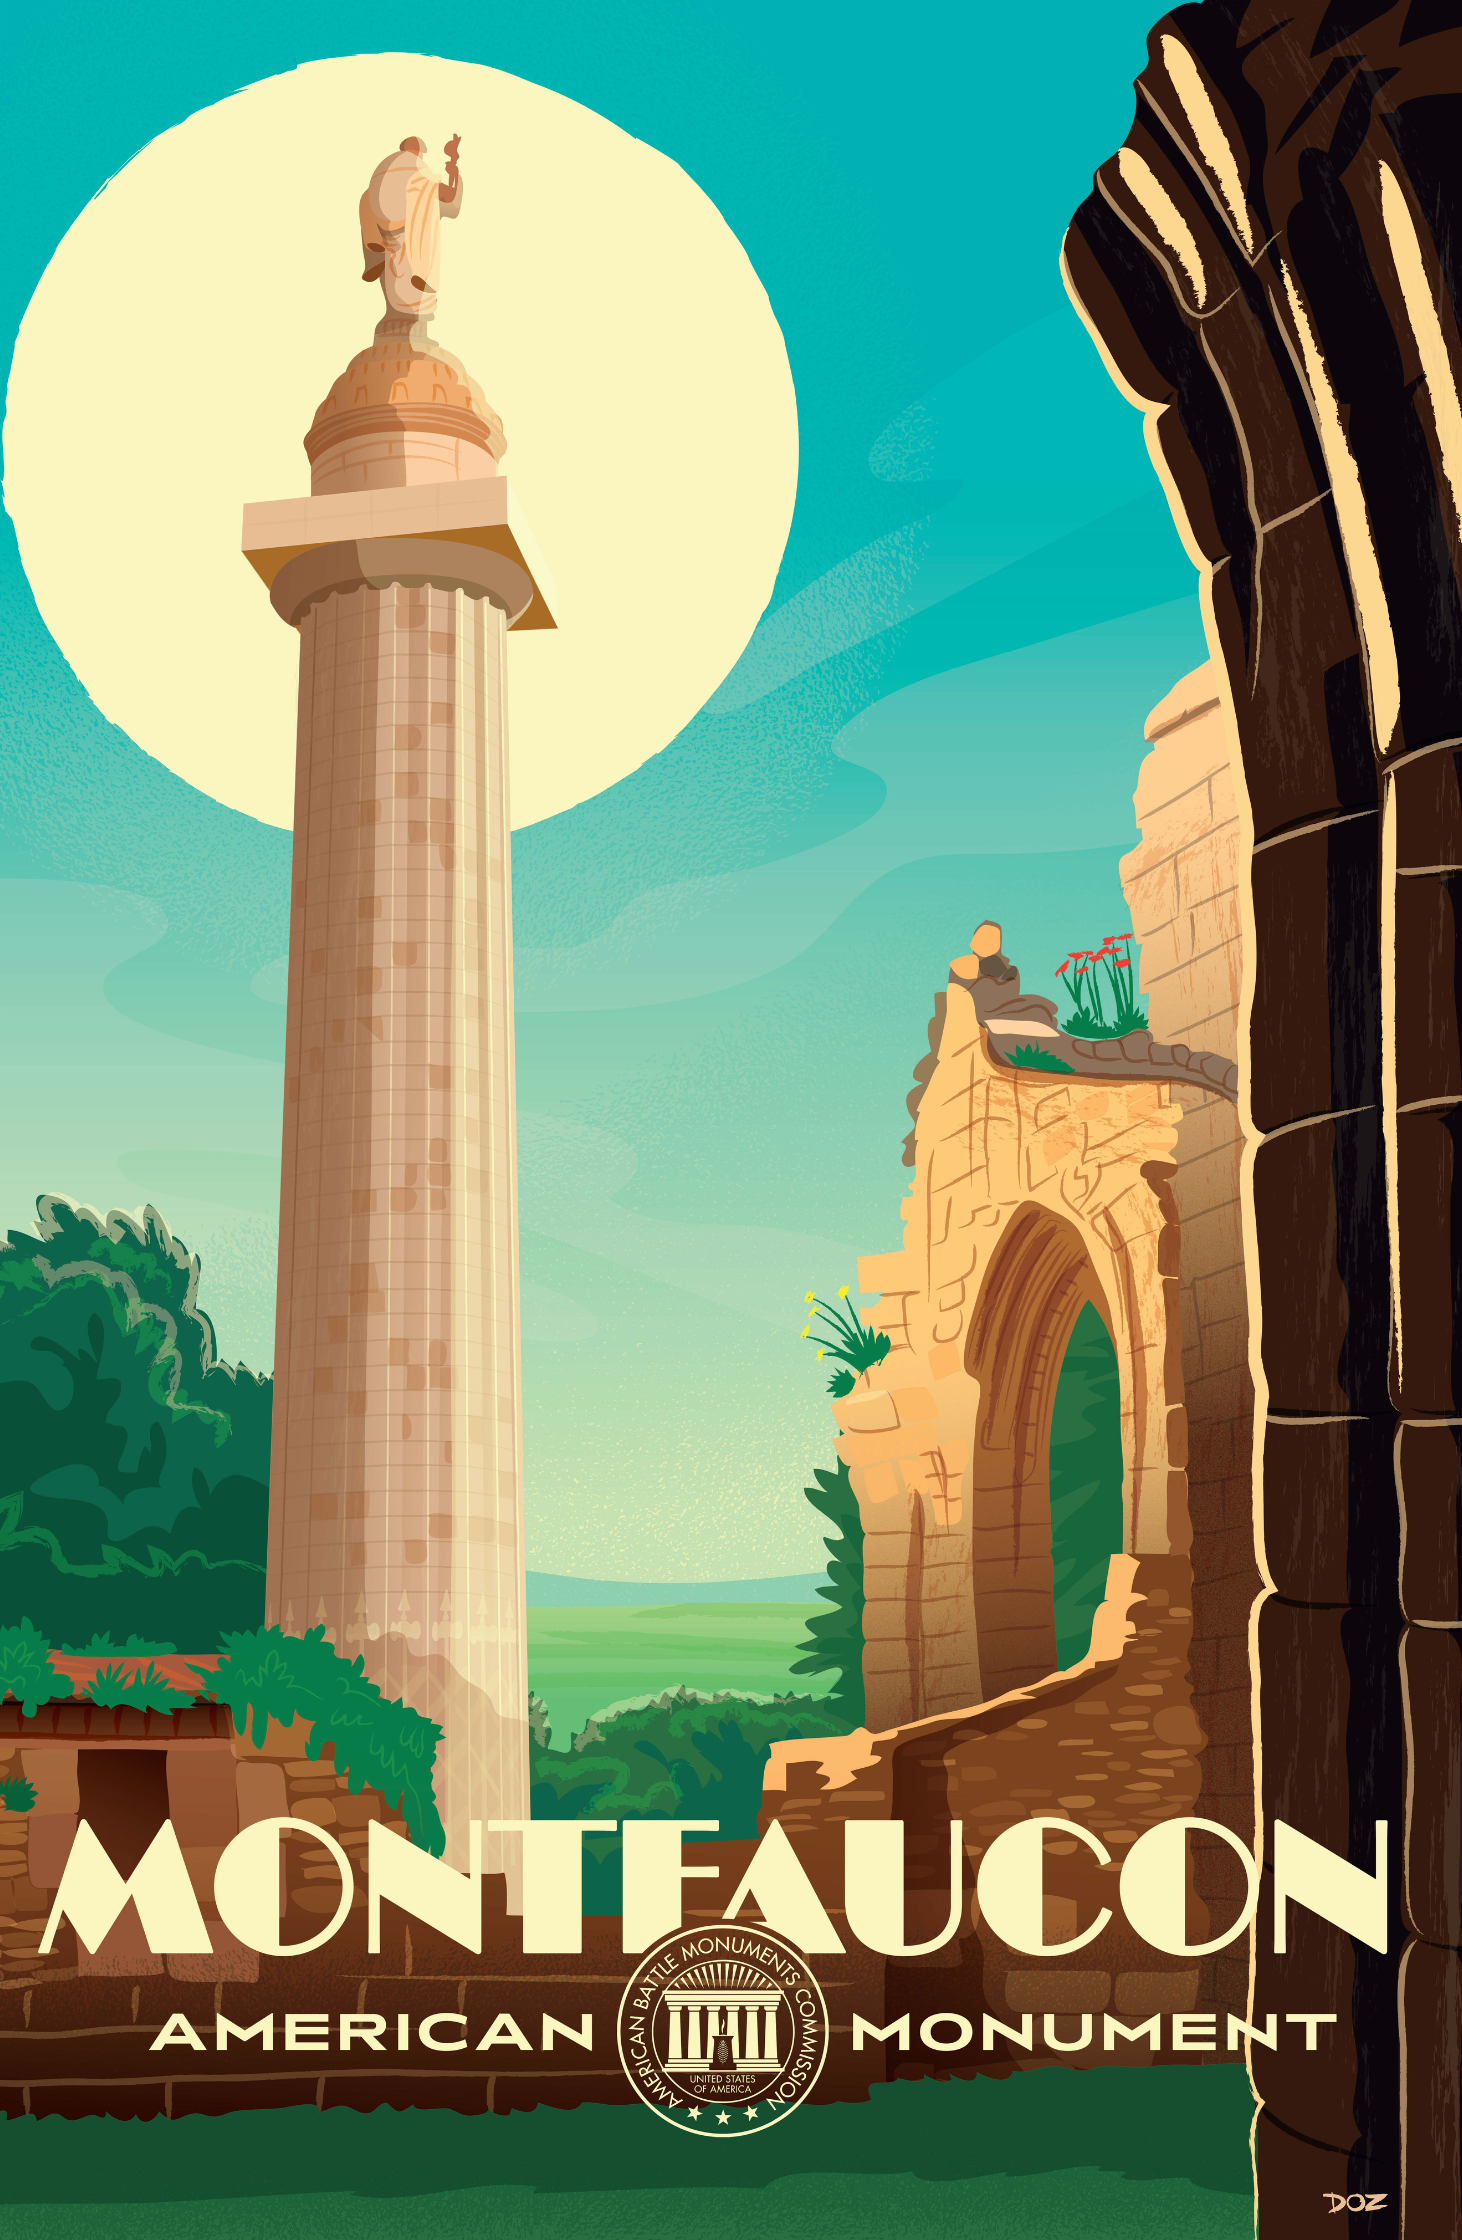 Vintage poster of Montfaucon American Monument